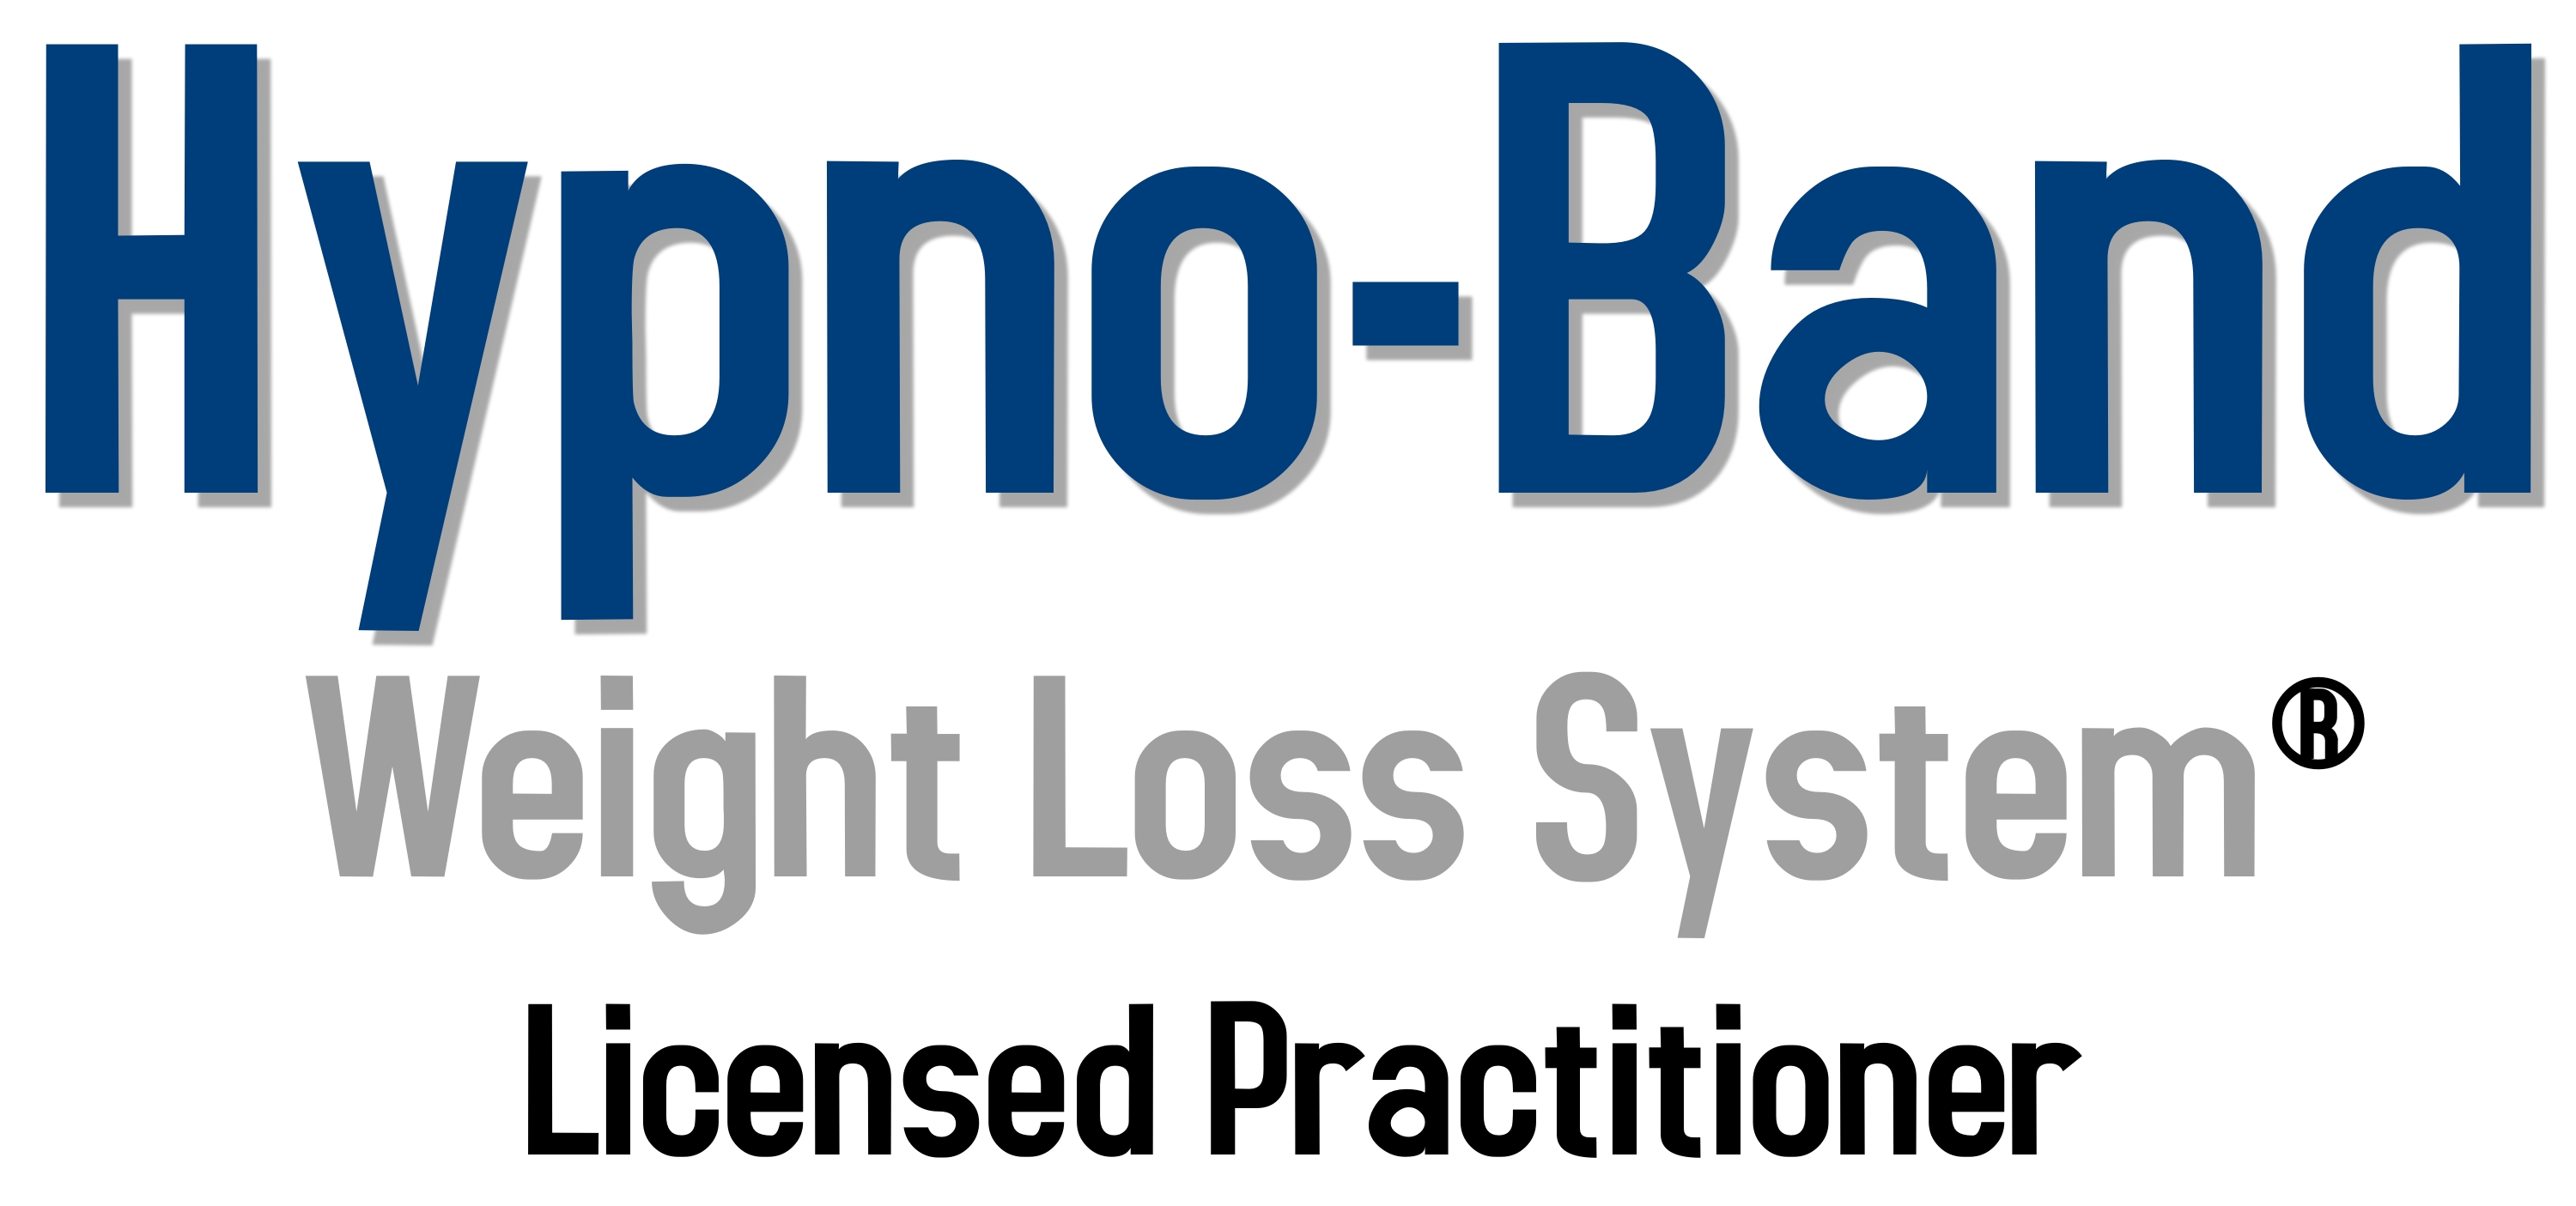 Newmarket Hypnotherapy licensed practitioner hypno band weight loss system